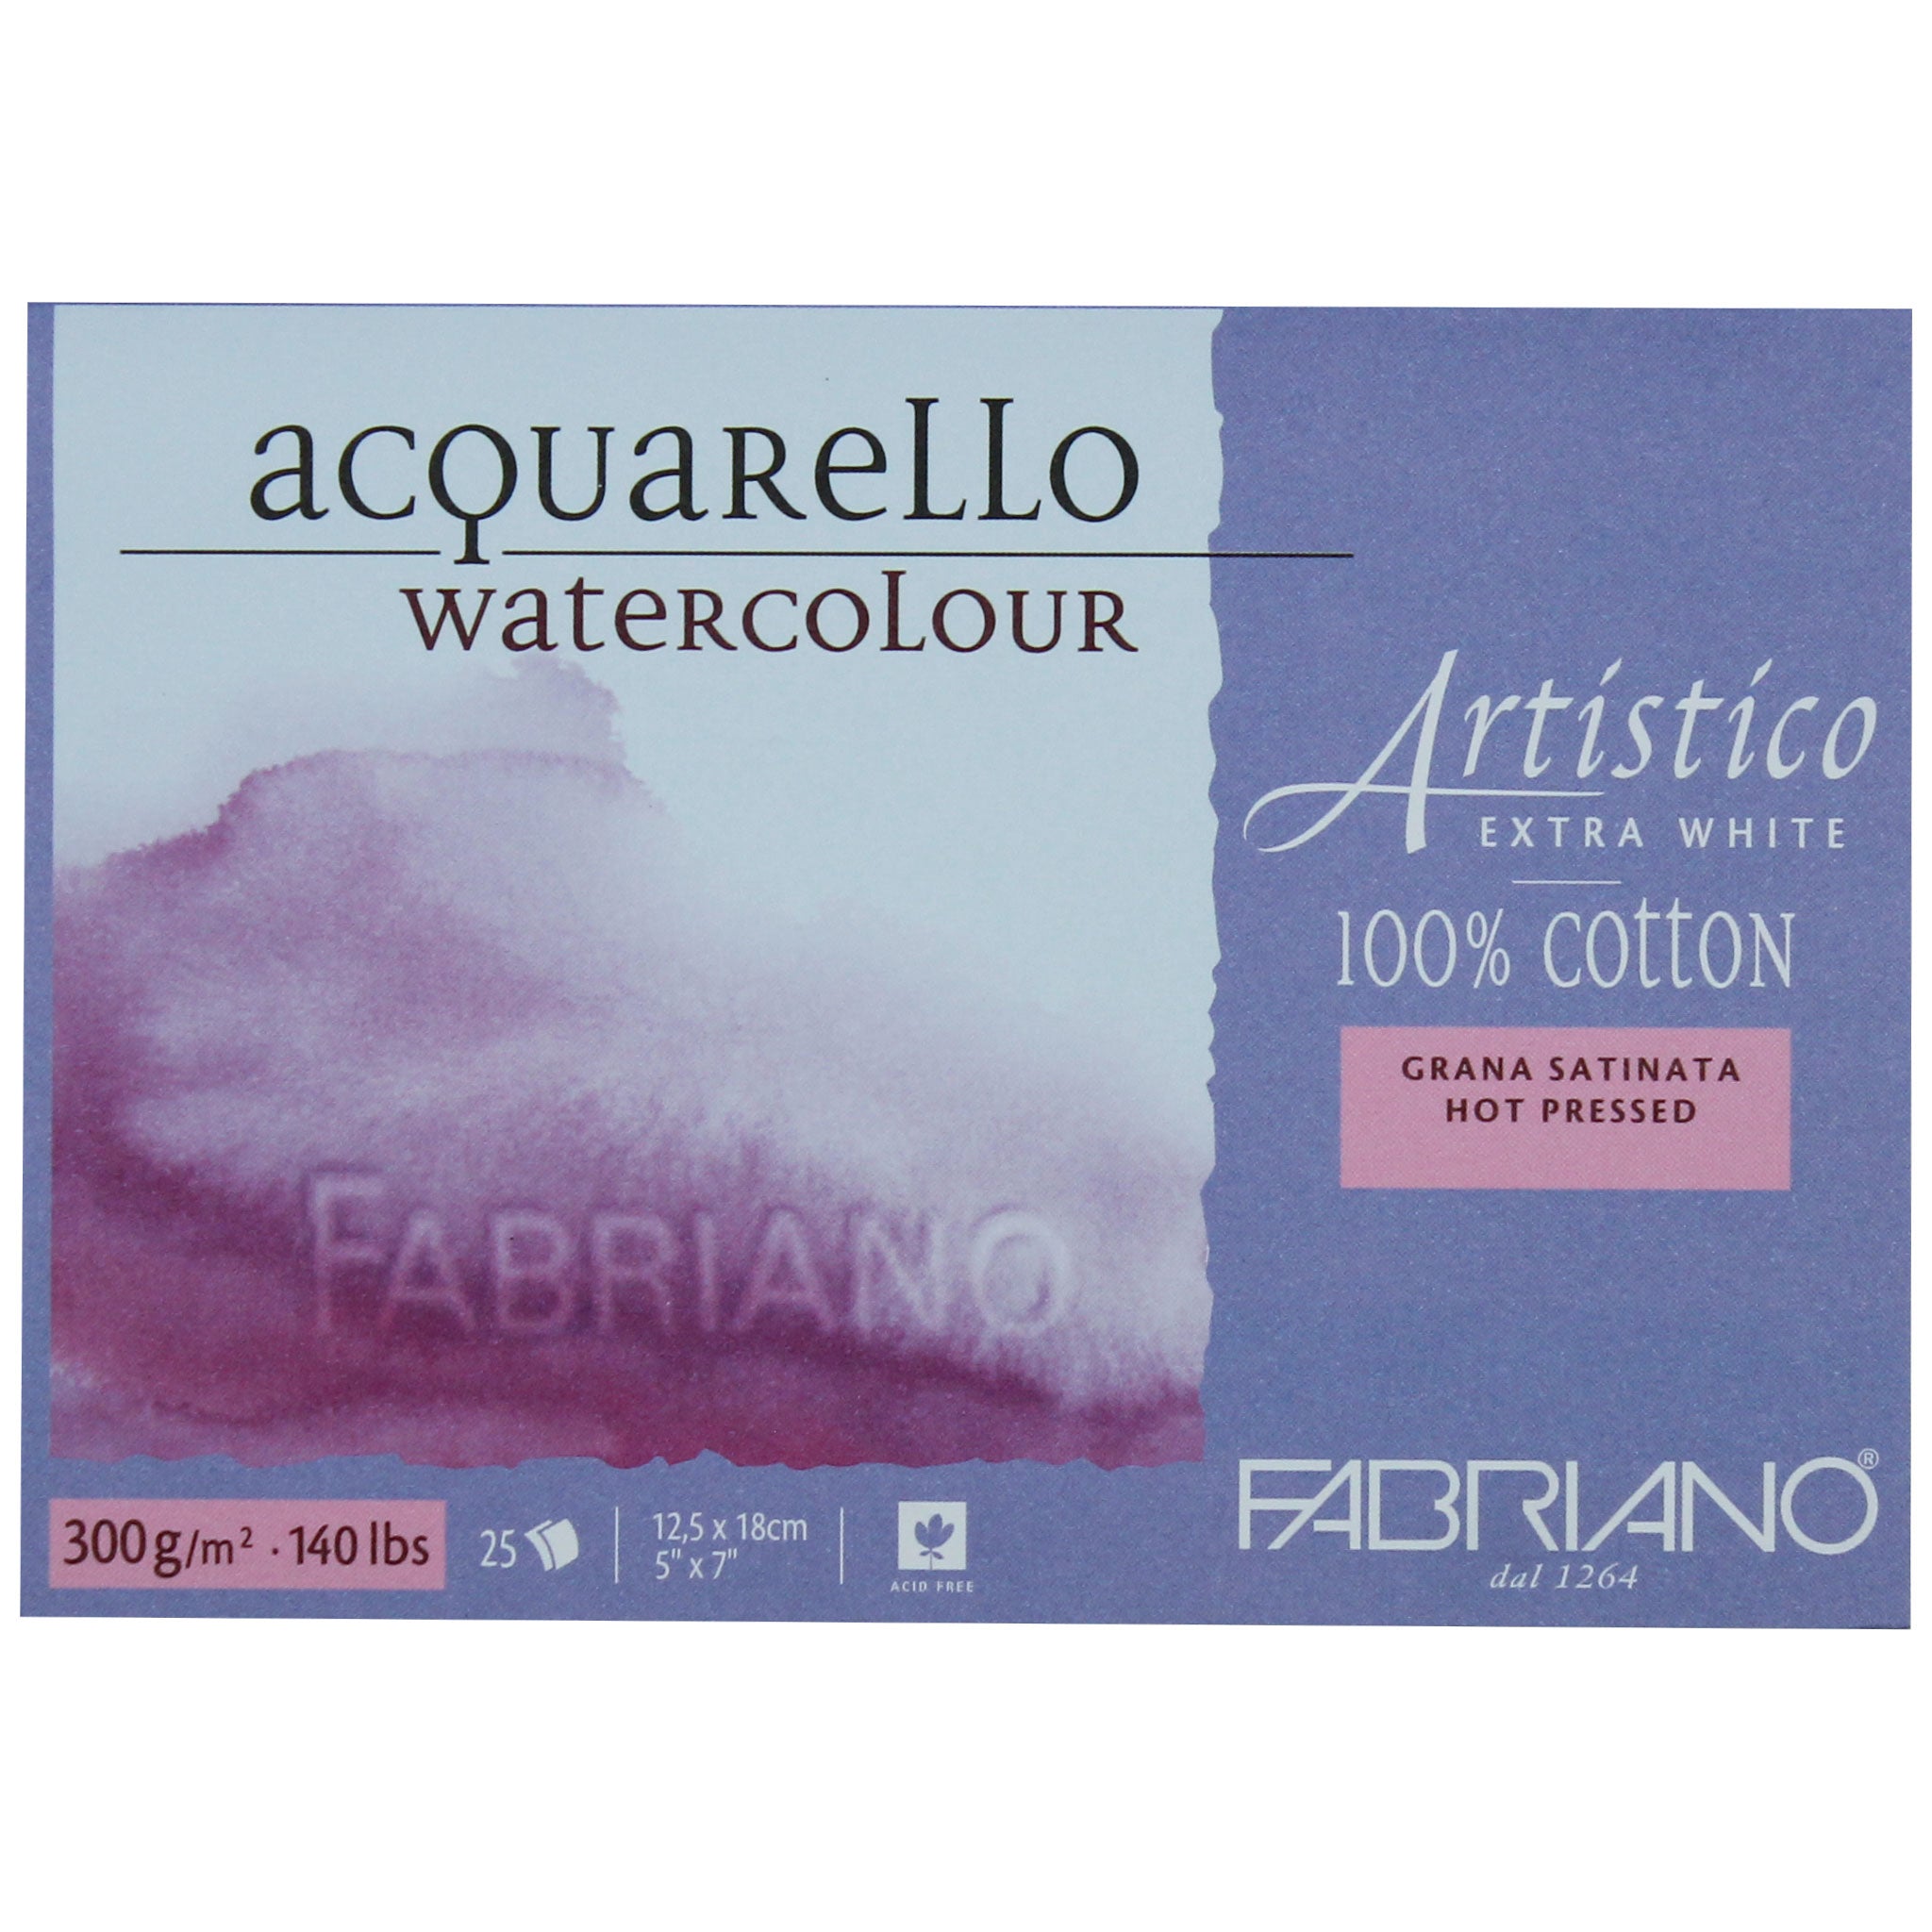 Fabriano Artistico Extra White Block: 20/25 Pages, 140lb, 300lb, Paperback  – Perfect Paper Company